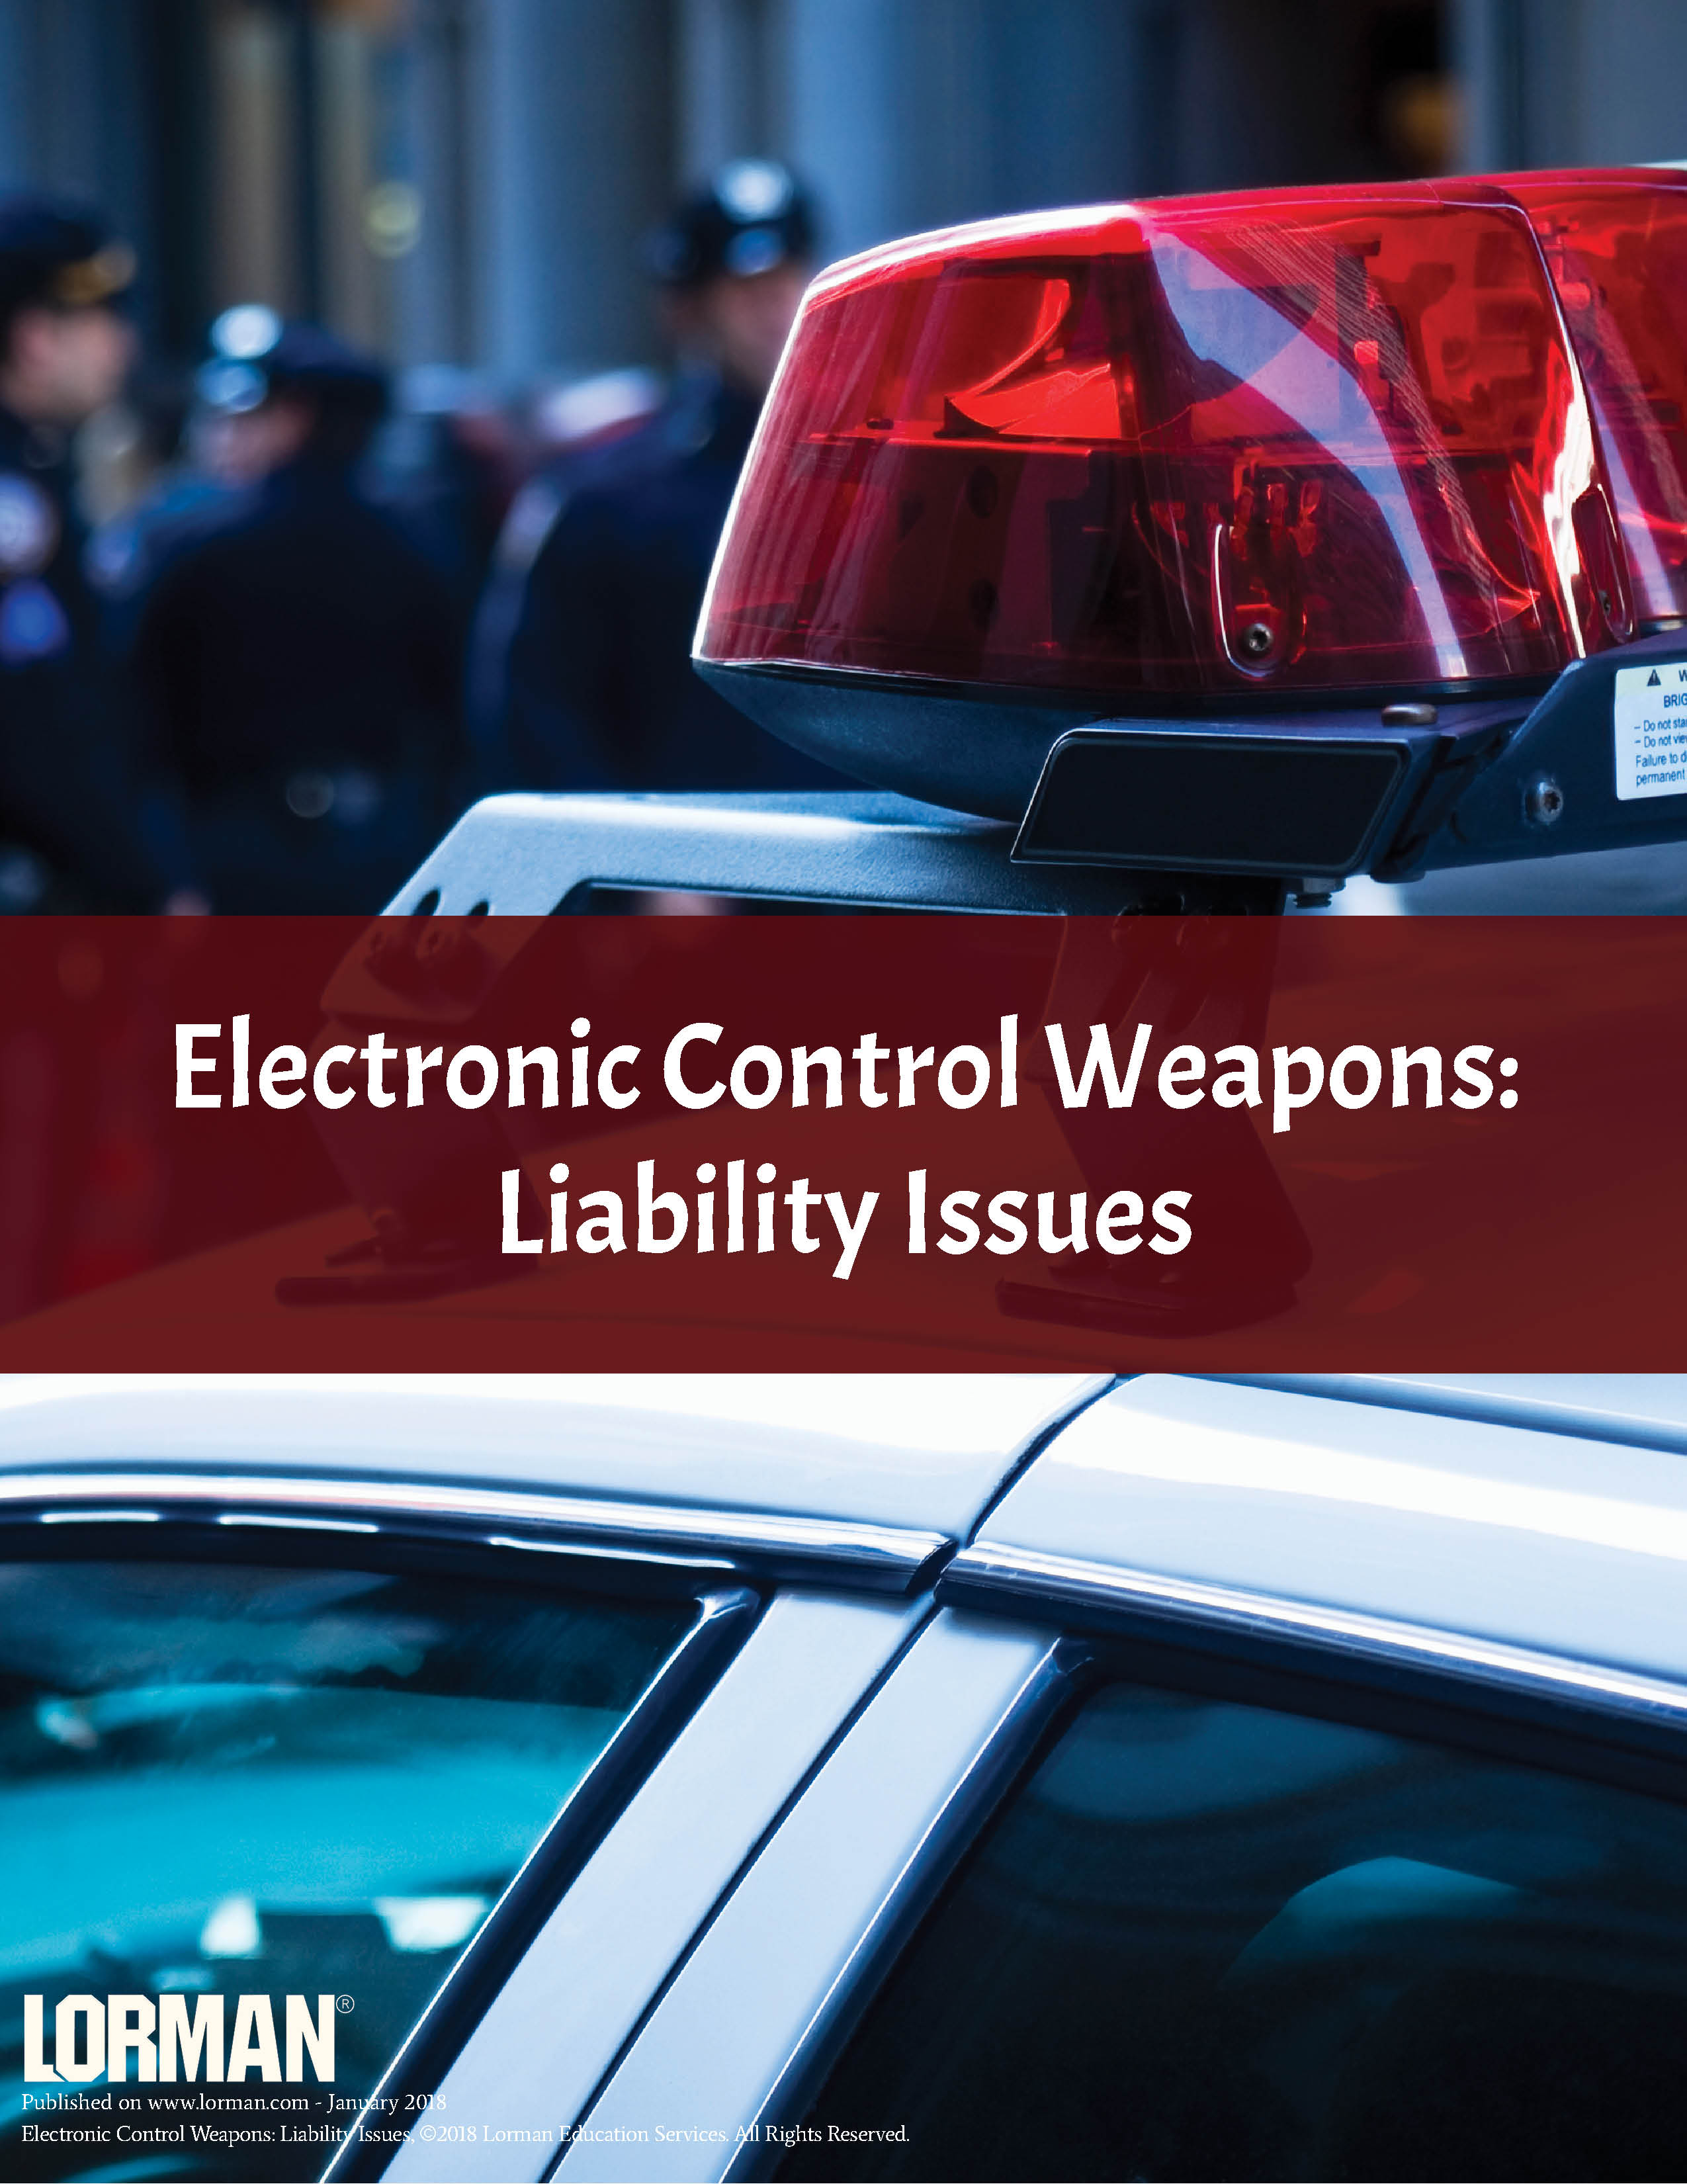 Electronic Control Weapons: Liability Issues